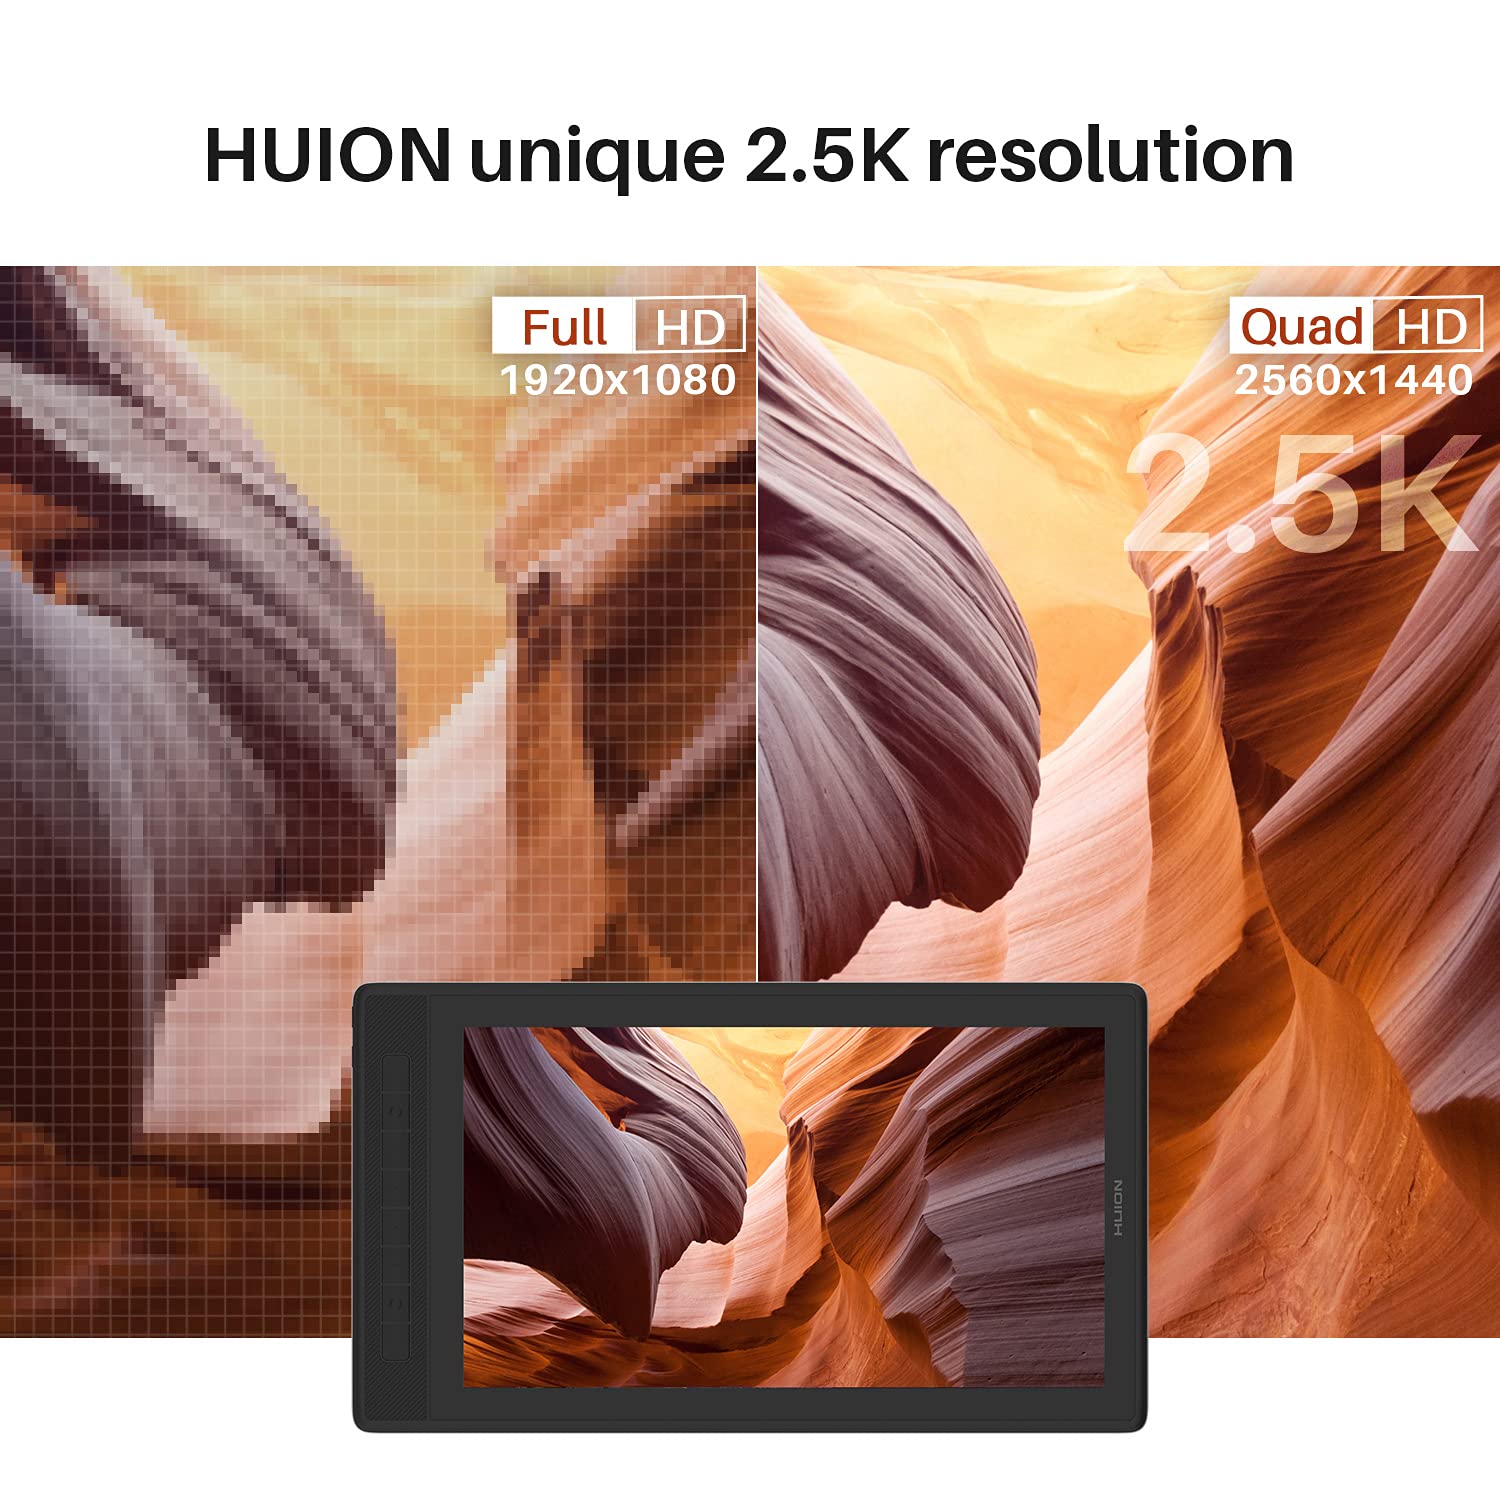 HUION 2022 Kamvas Pro 16 2.5K QHD Graphics Drawing Tablet with Screen, 145% sRGB and Full Lamination Pen Display with Battery-Free Pen, Compatible with Windows, Mac & Android